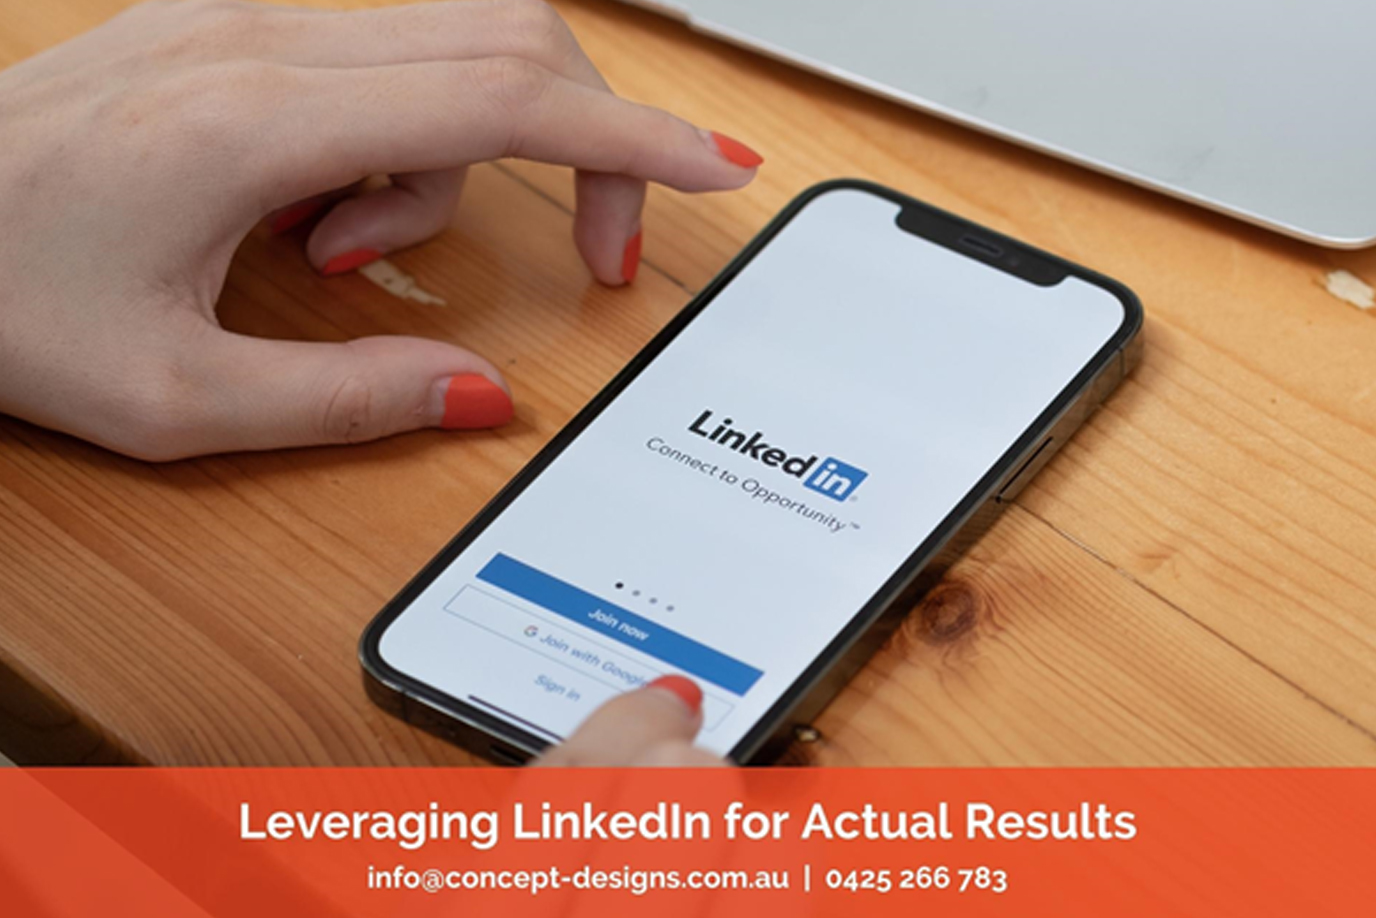 Leveraging LinkedIn for Actual Results